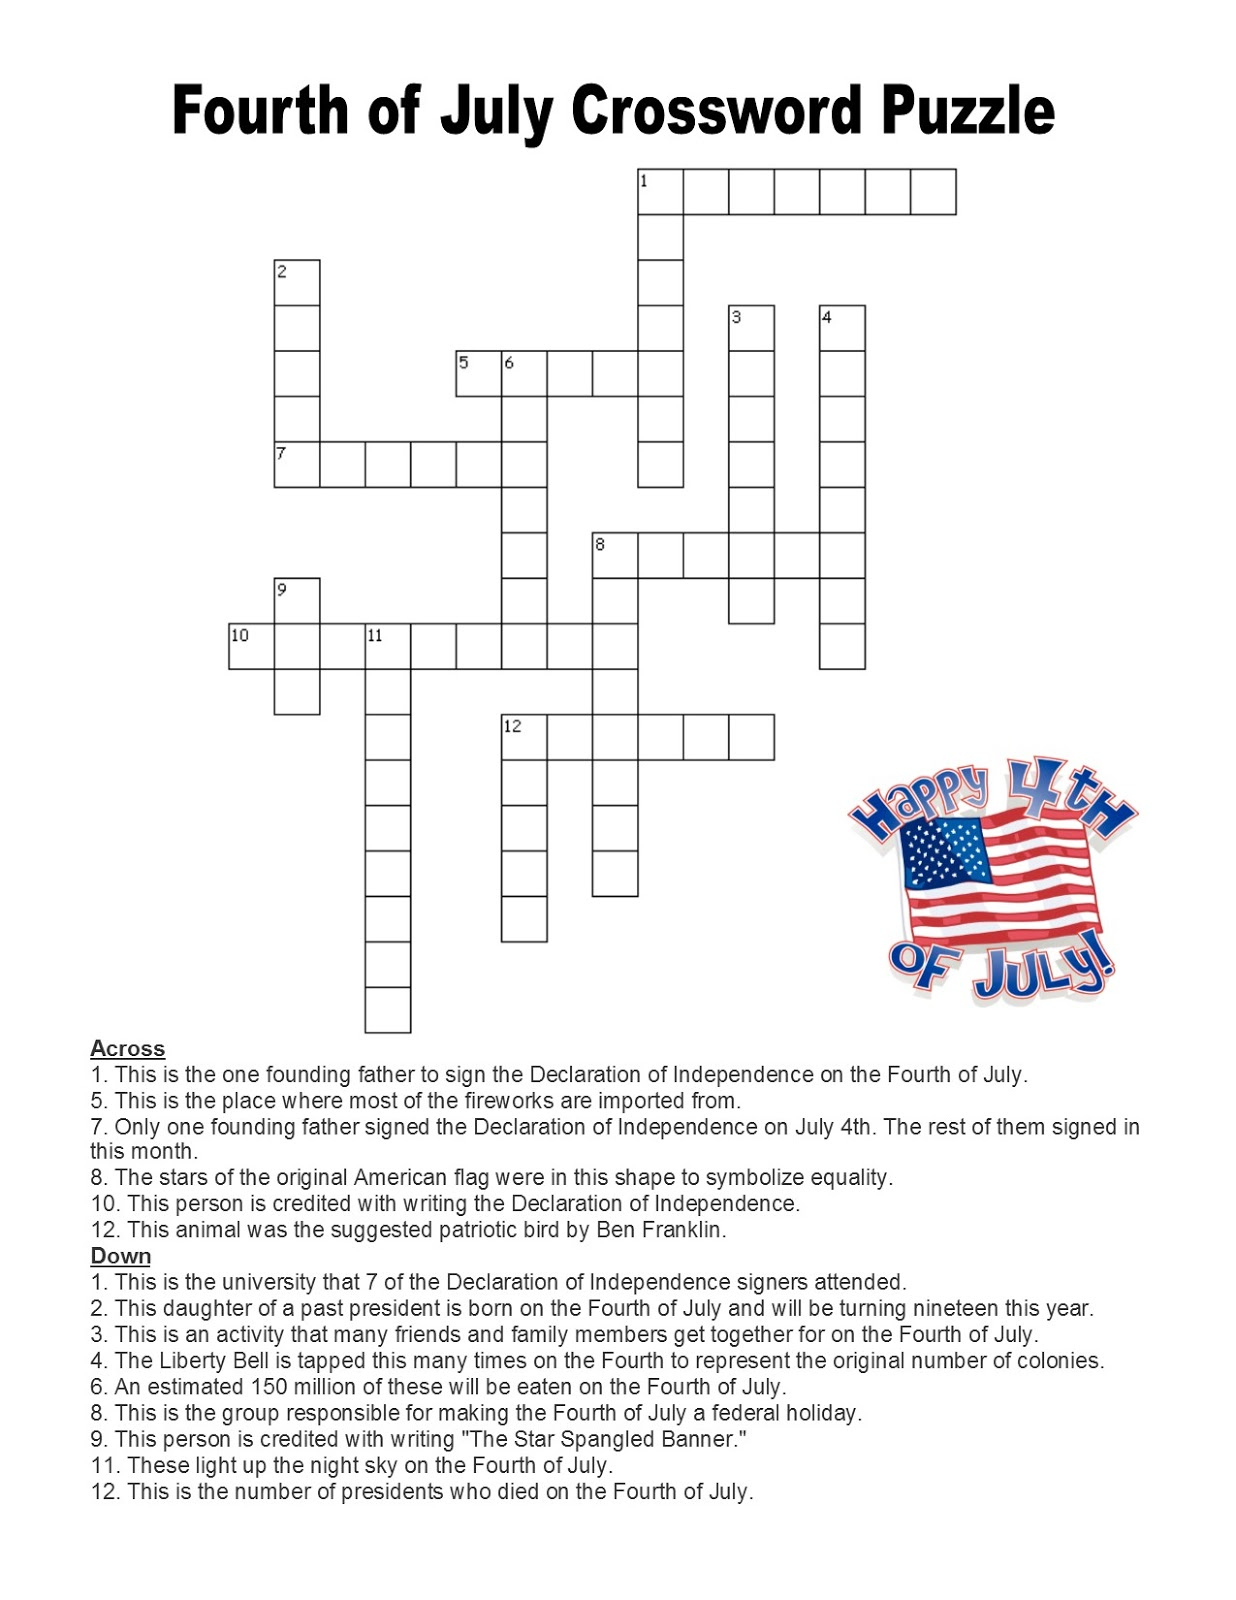 Language Summer Extra Credit WEEK 3 FOURTH OF JULY CROSSWORD PUZZLE